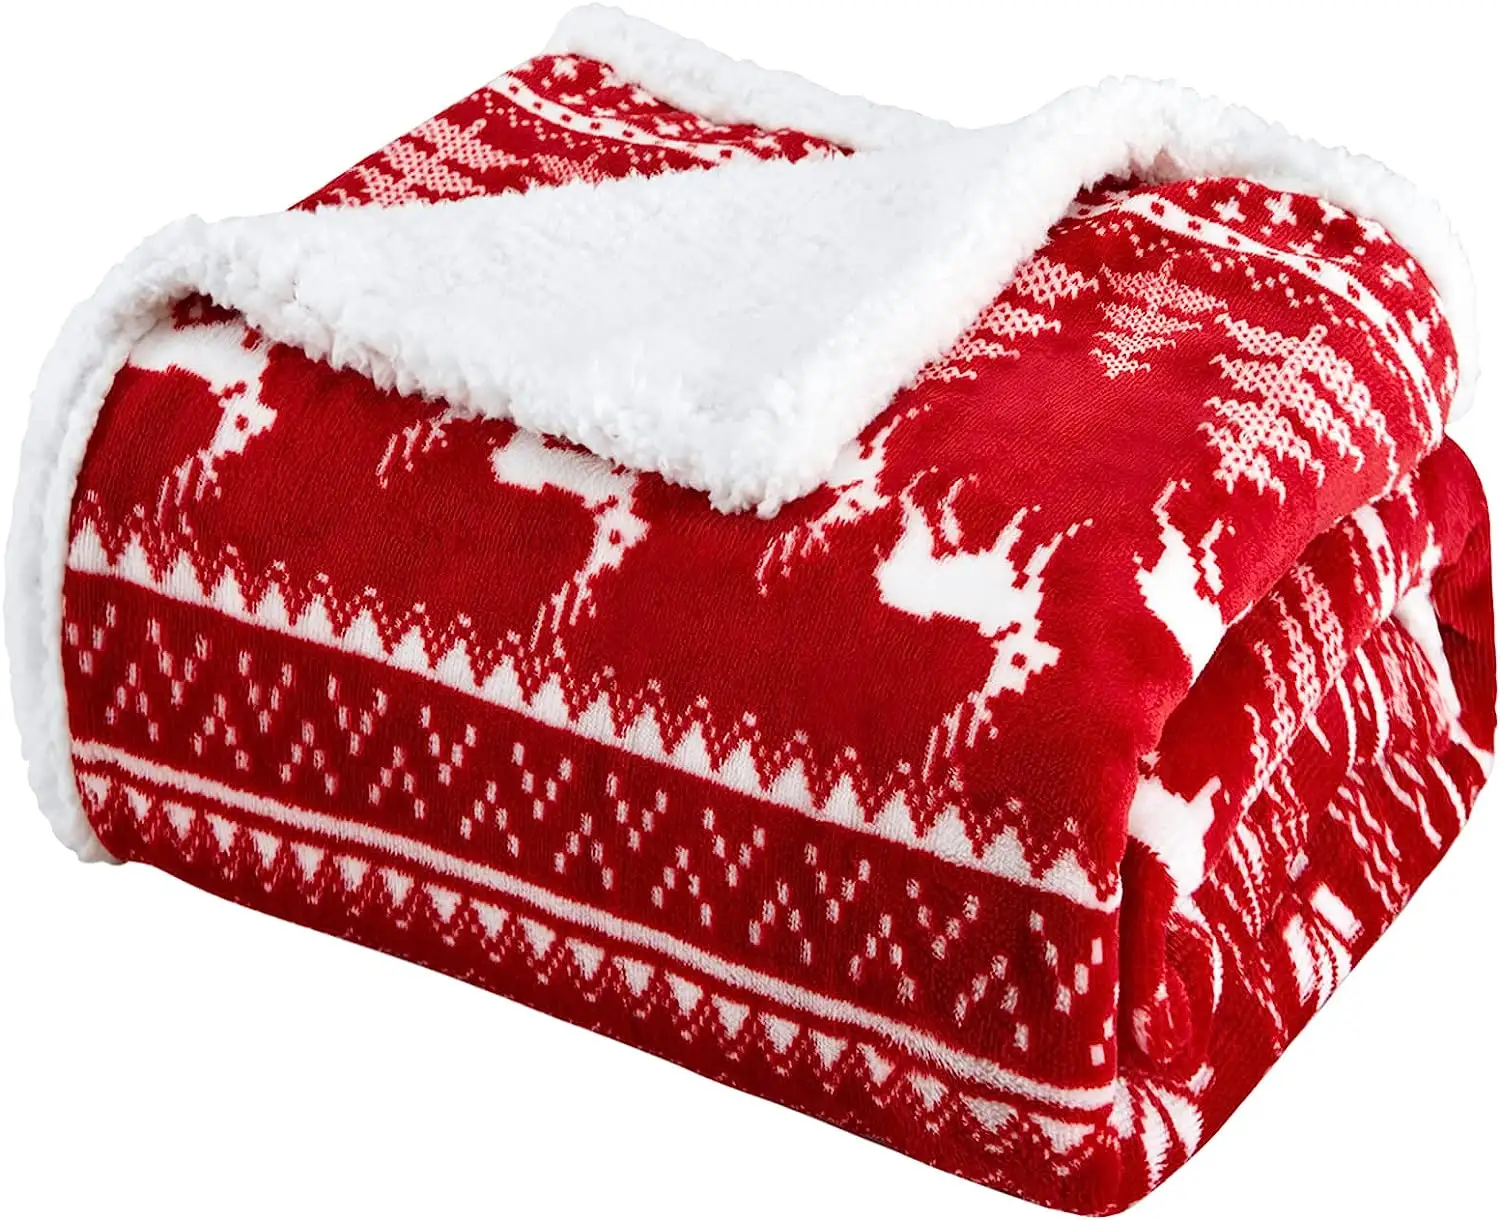 PCM Hot Selling Home Textiles Custom Printed Beautiful Soft Warm Throw Blanket Thick Flannel Sherpa Fleece Christmas Blanket